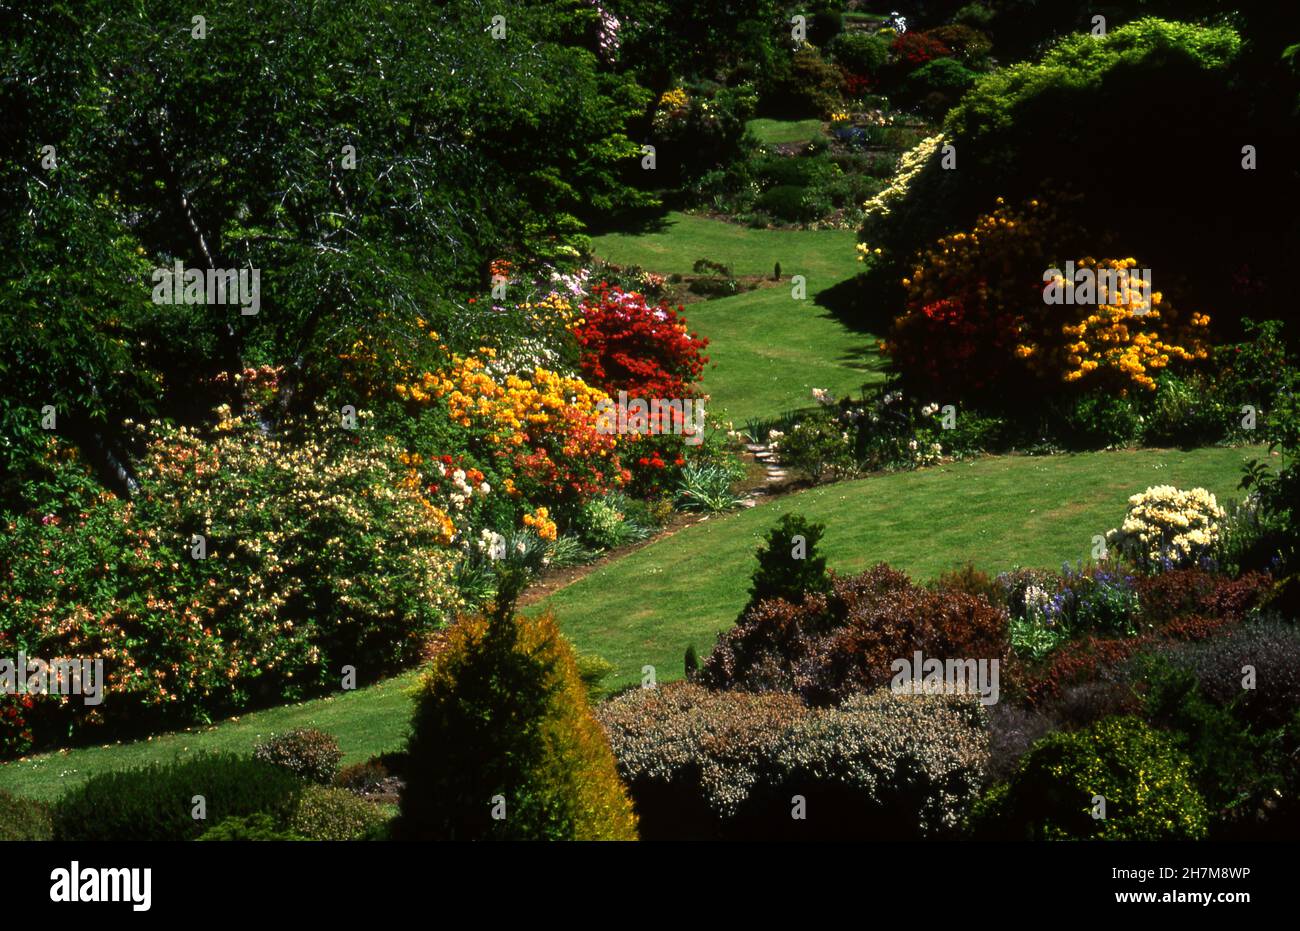 SLOPING GARDEN, LAWN, TREES, SHRUBS, RHODENDRONS, AZALEAS, CONIFERS AND HEATH. BLUE MOUNTAINS, NEW SOUTH WALES, AUSTRALIA. Stock Photo